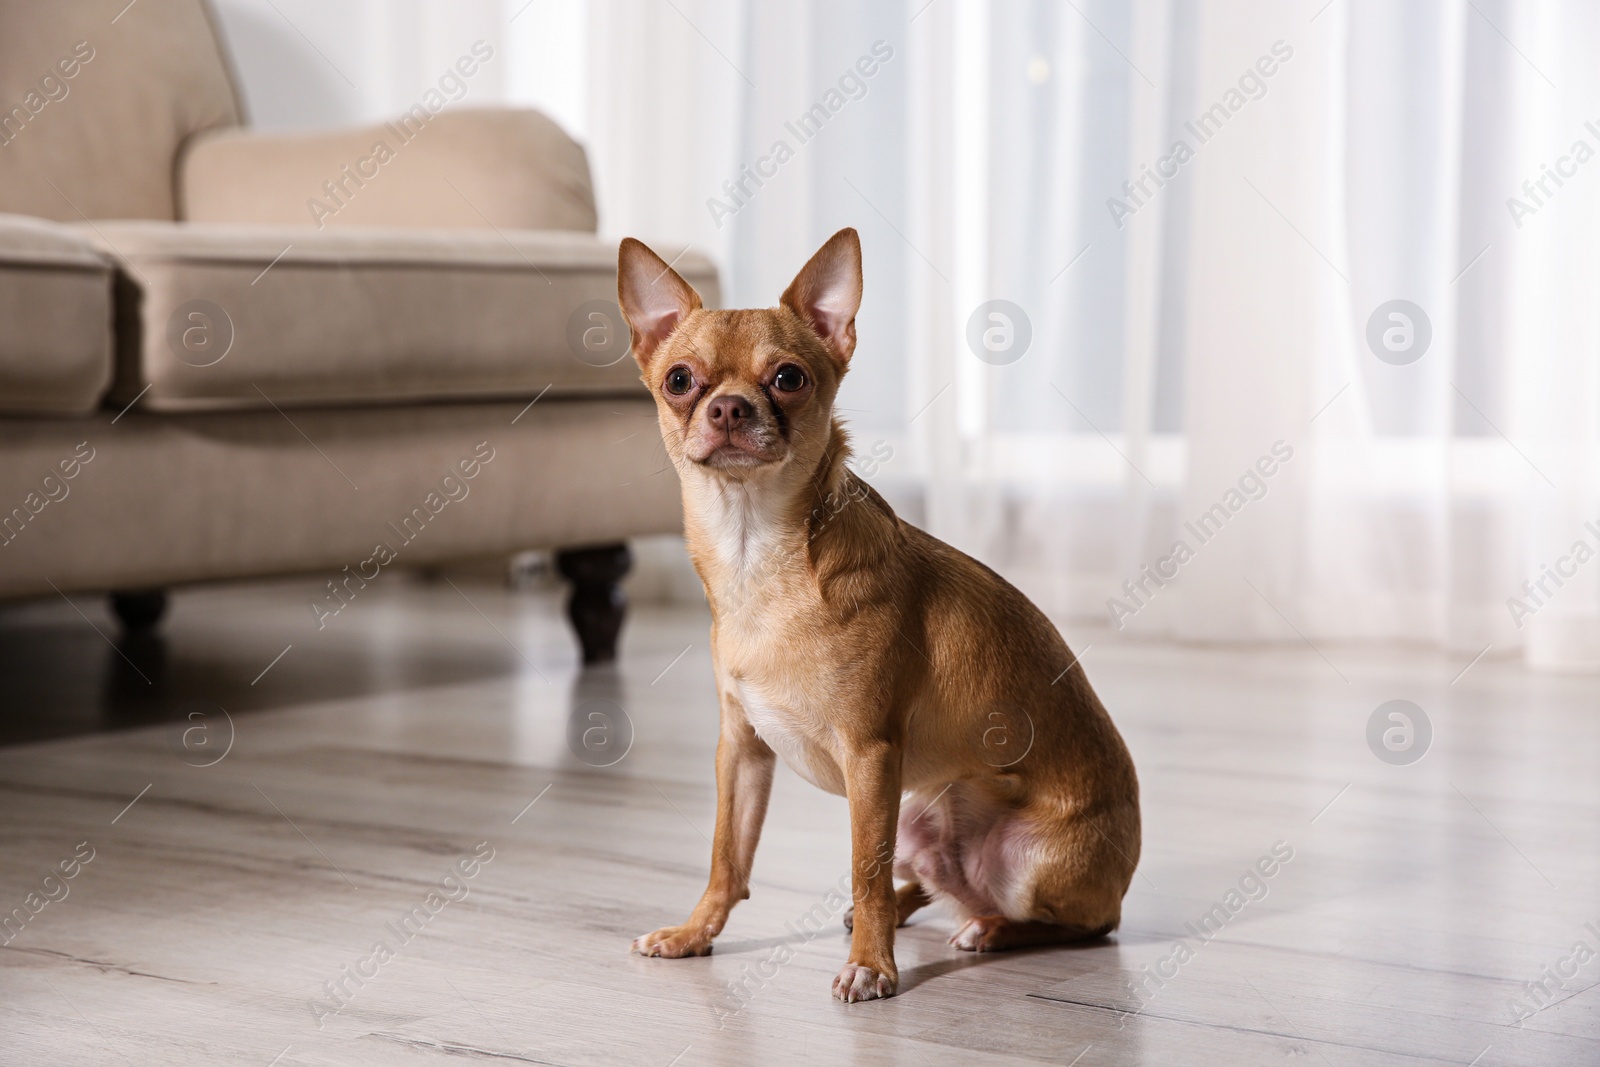 Photo of Cute Chihuahua dog sitting on warm floor indoors. Heating system